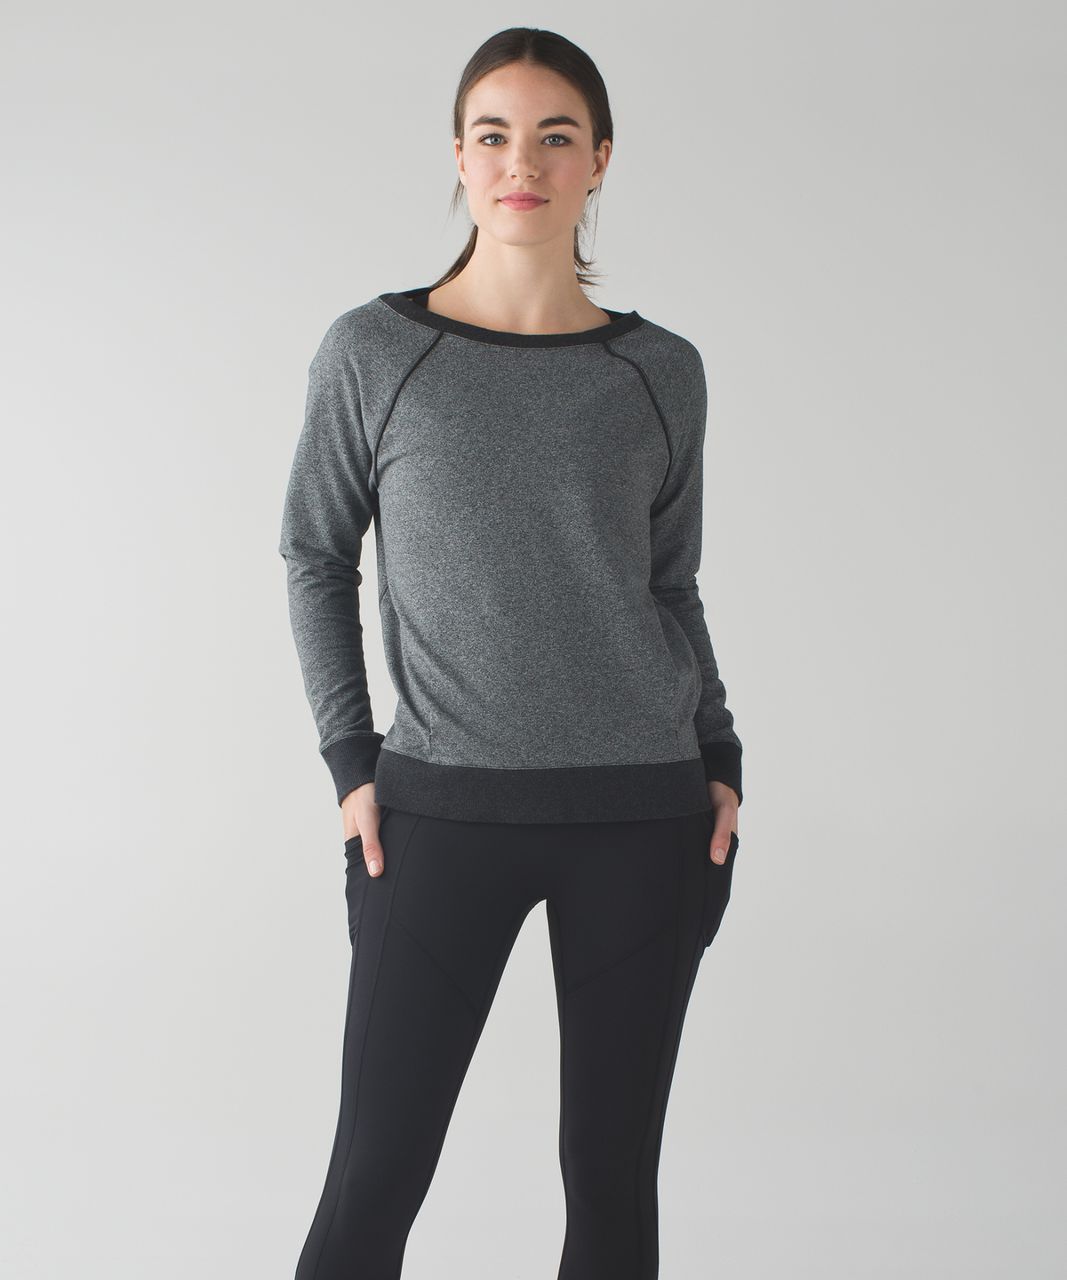 Lululemon Crew Love Pullover (First Release) - Heathered Speckled Black